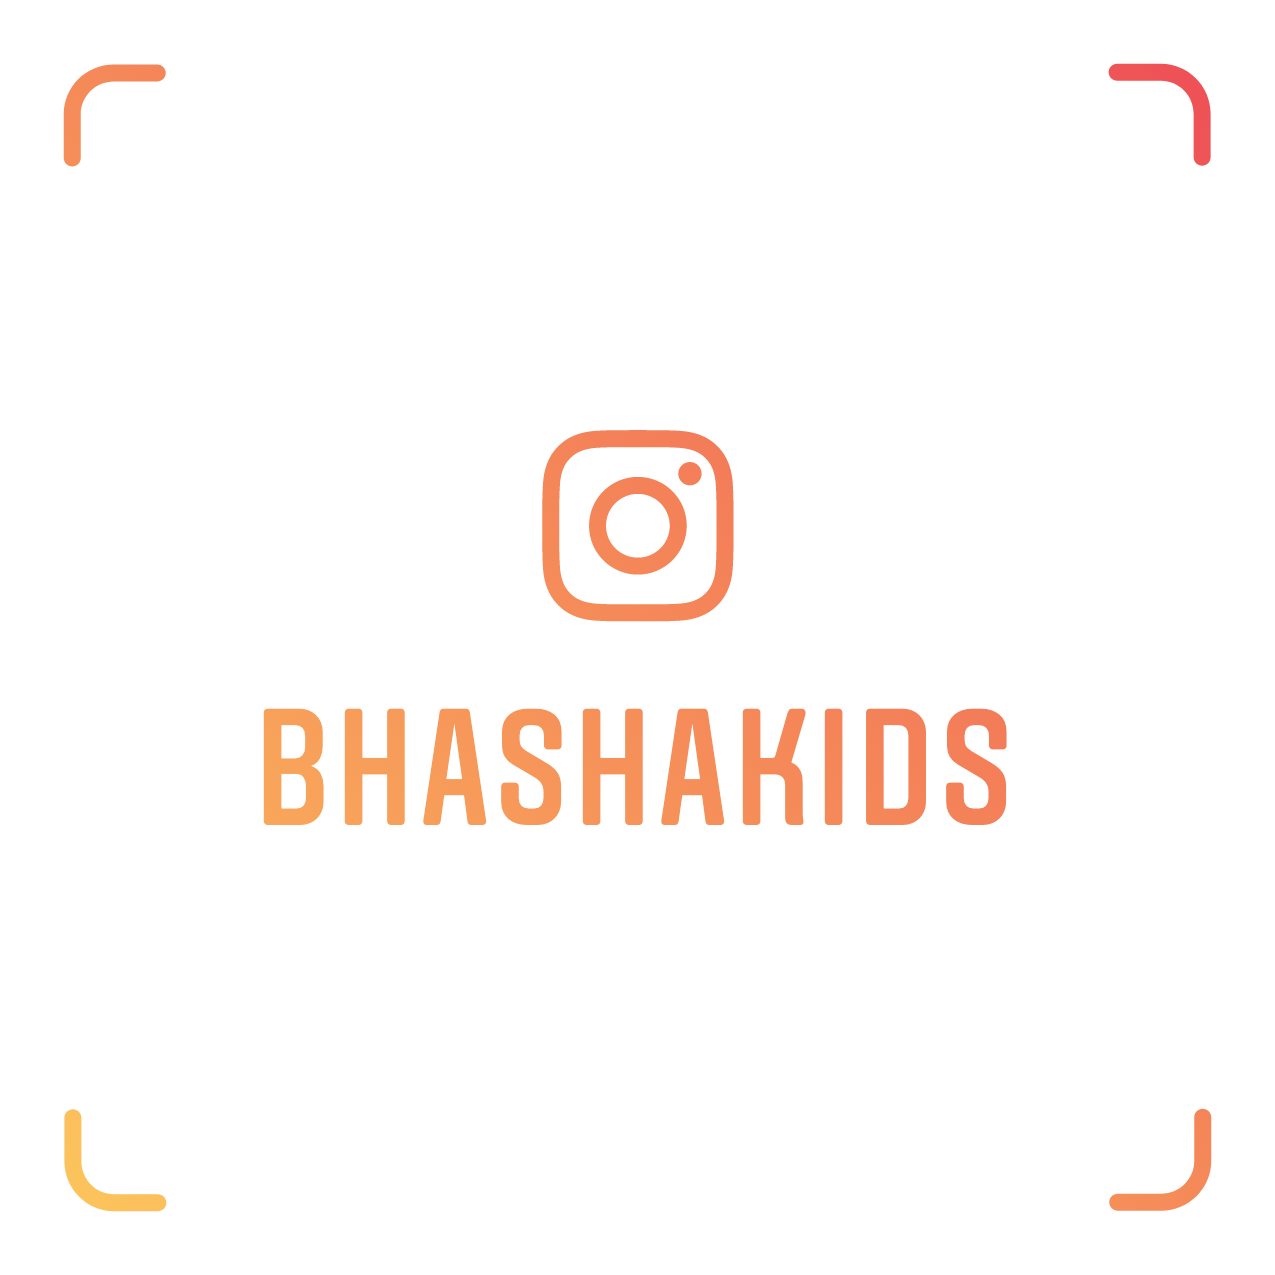 BhashaKids Language Interviews - IG Live- Check it Out!